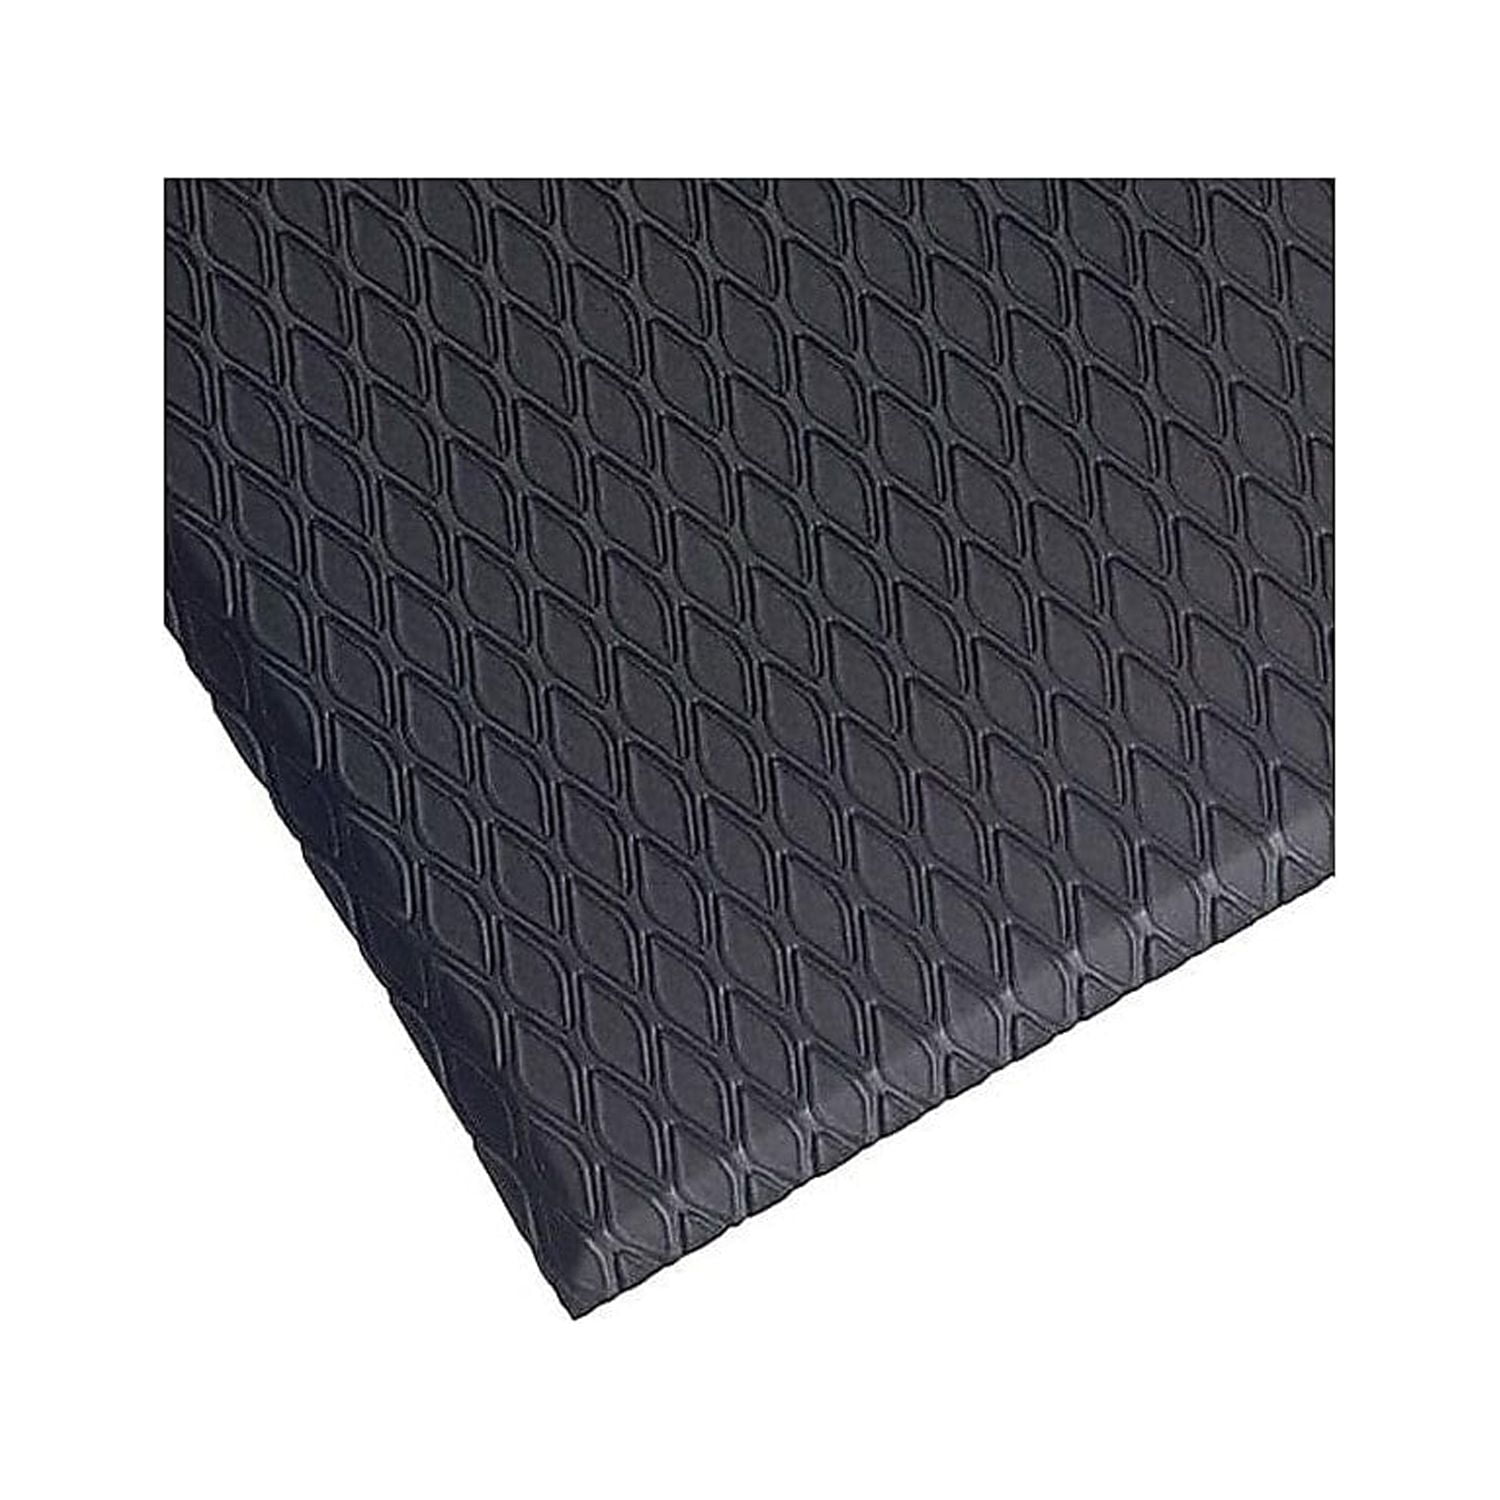 Multipurpose PVC Grip Mat Odor Free Hand Washable Black Color Trim to Length or Shape 12 in x 60 in Pack of 3